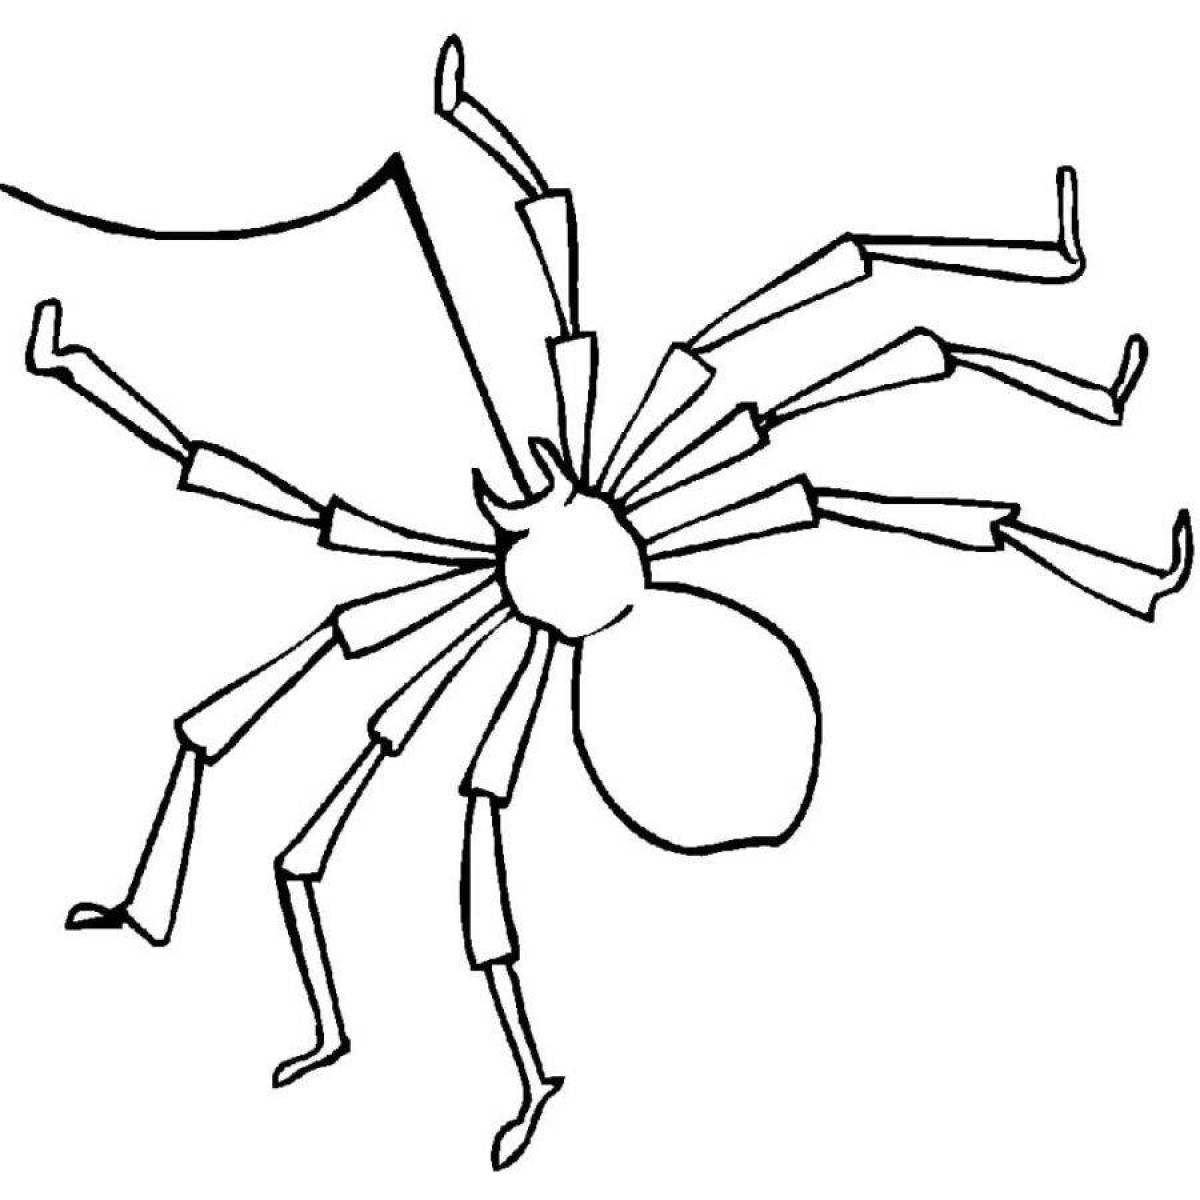 Amazing spider coloring page